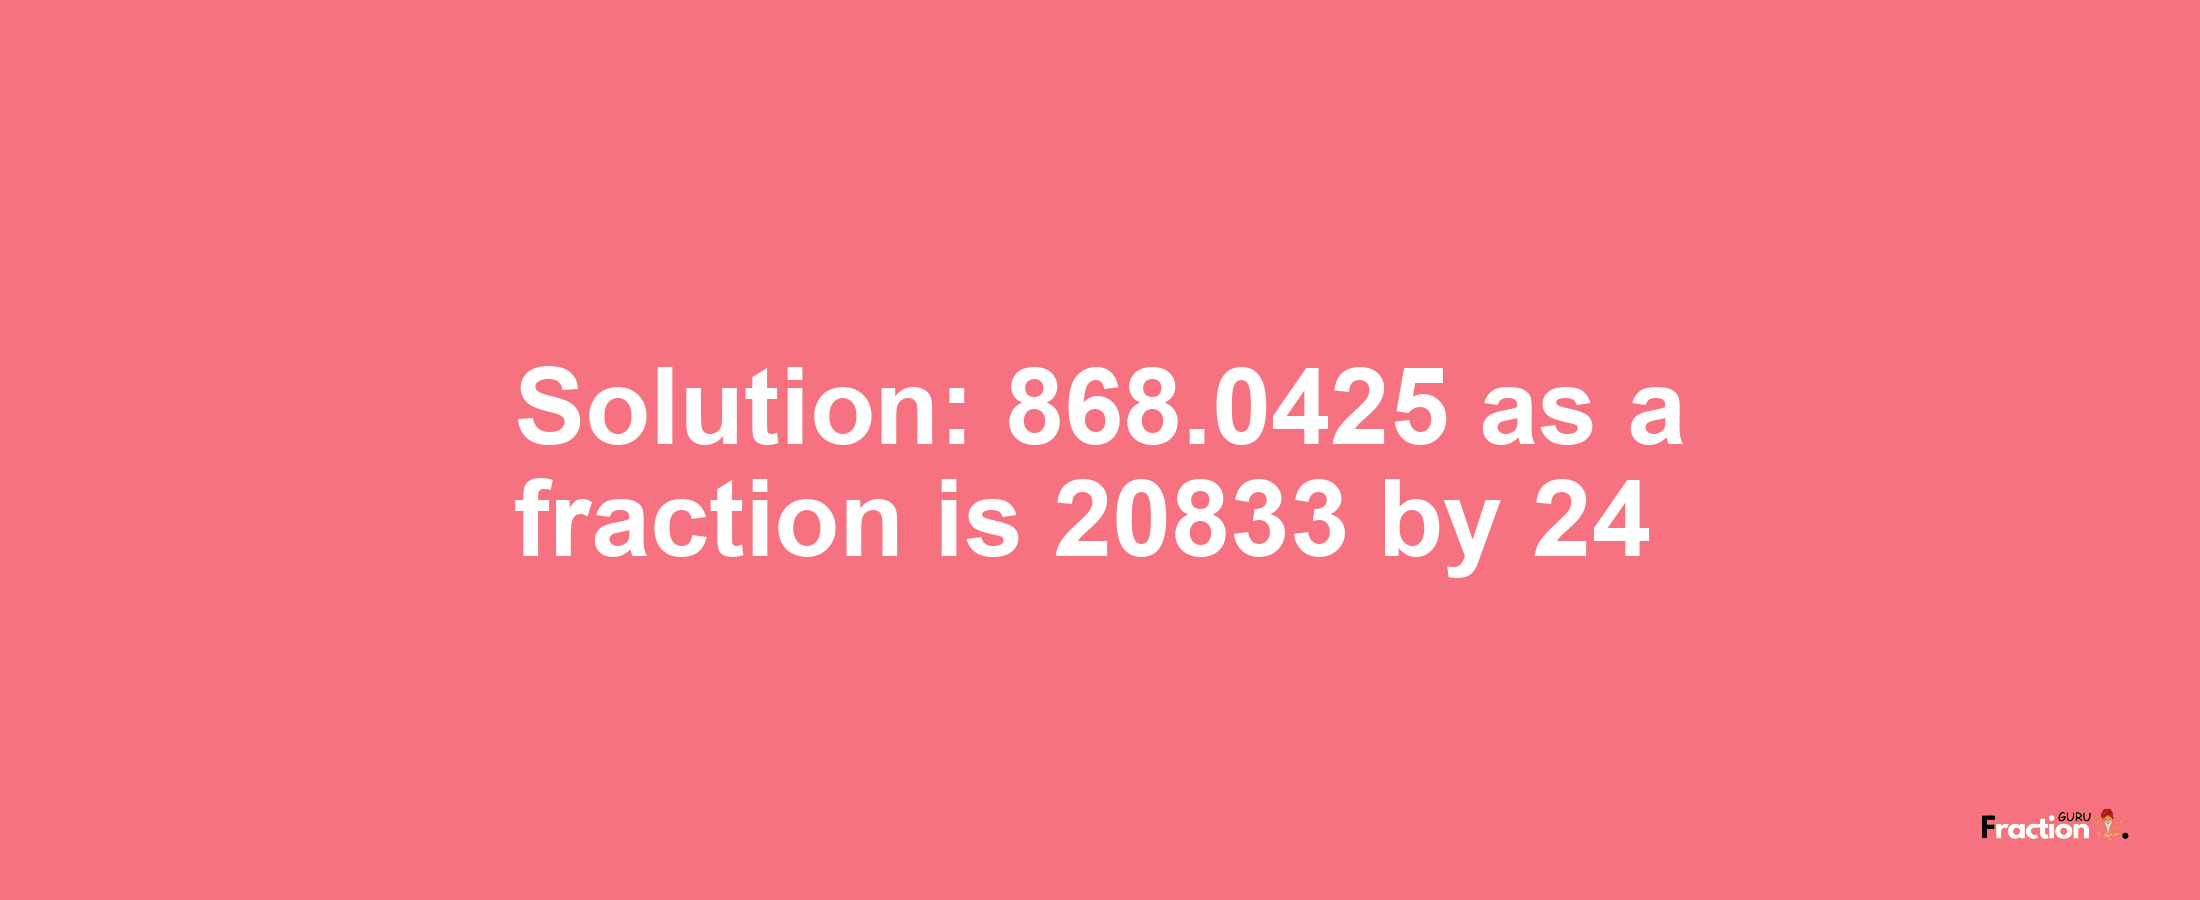 Solution:868.0425 as a fraction is 20833/24